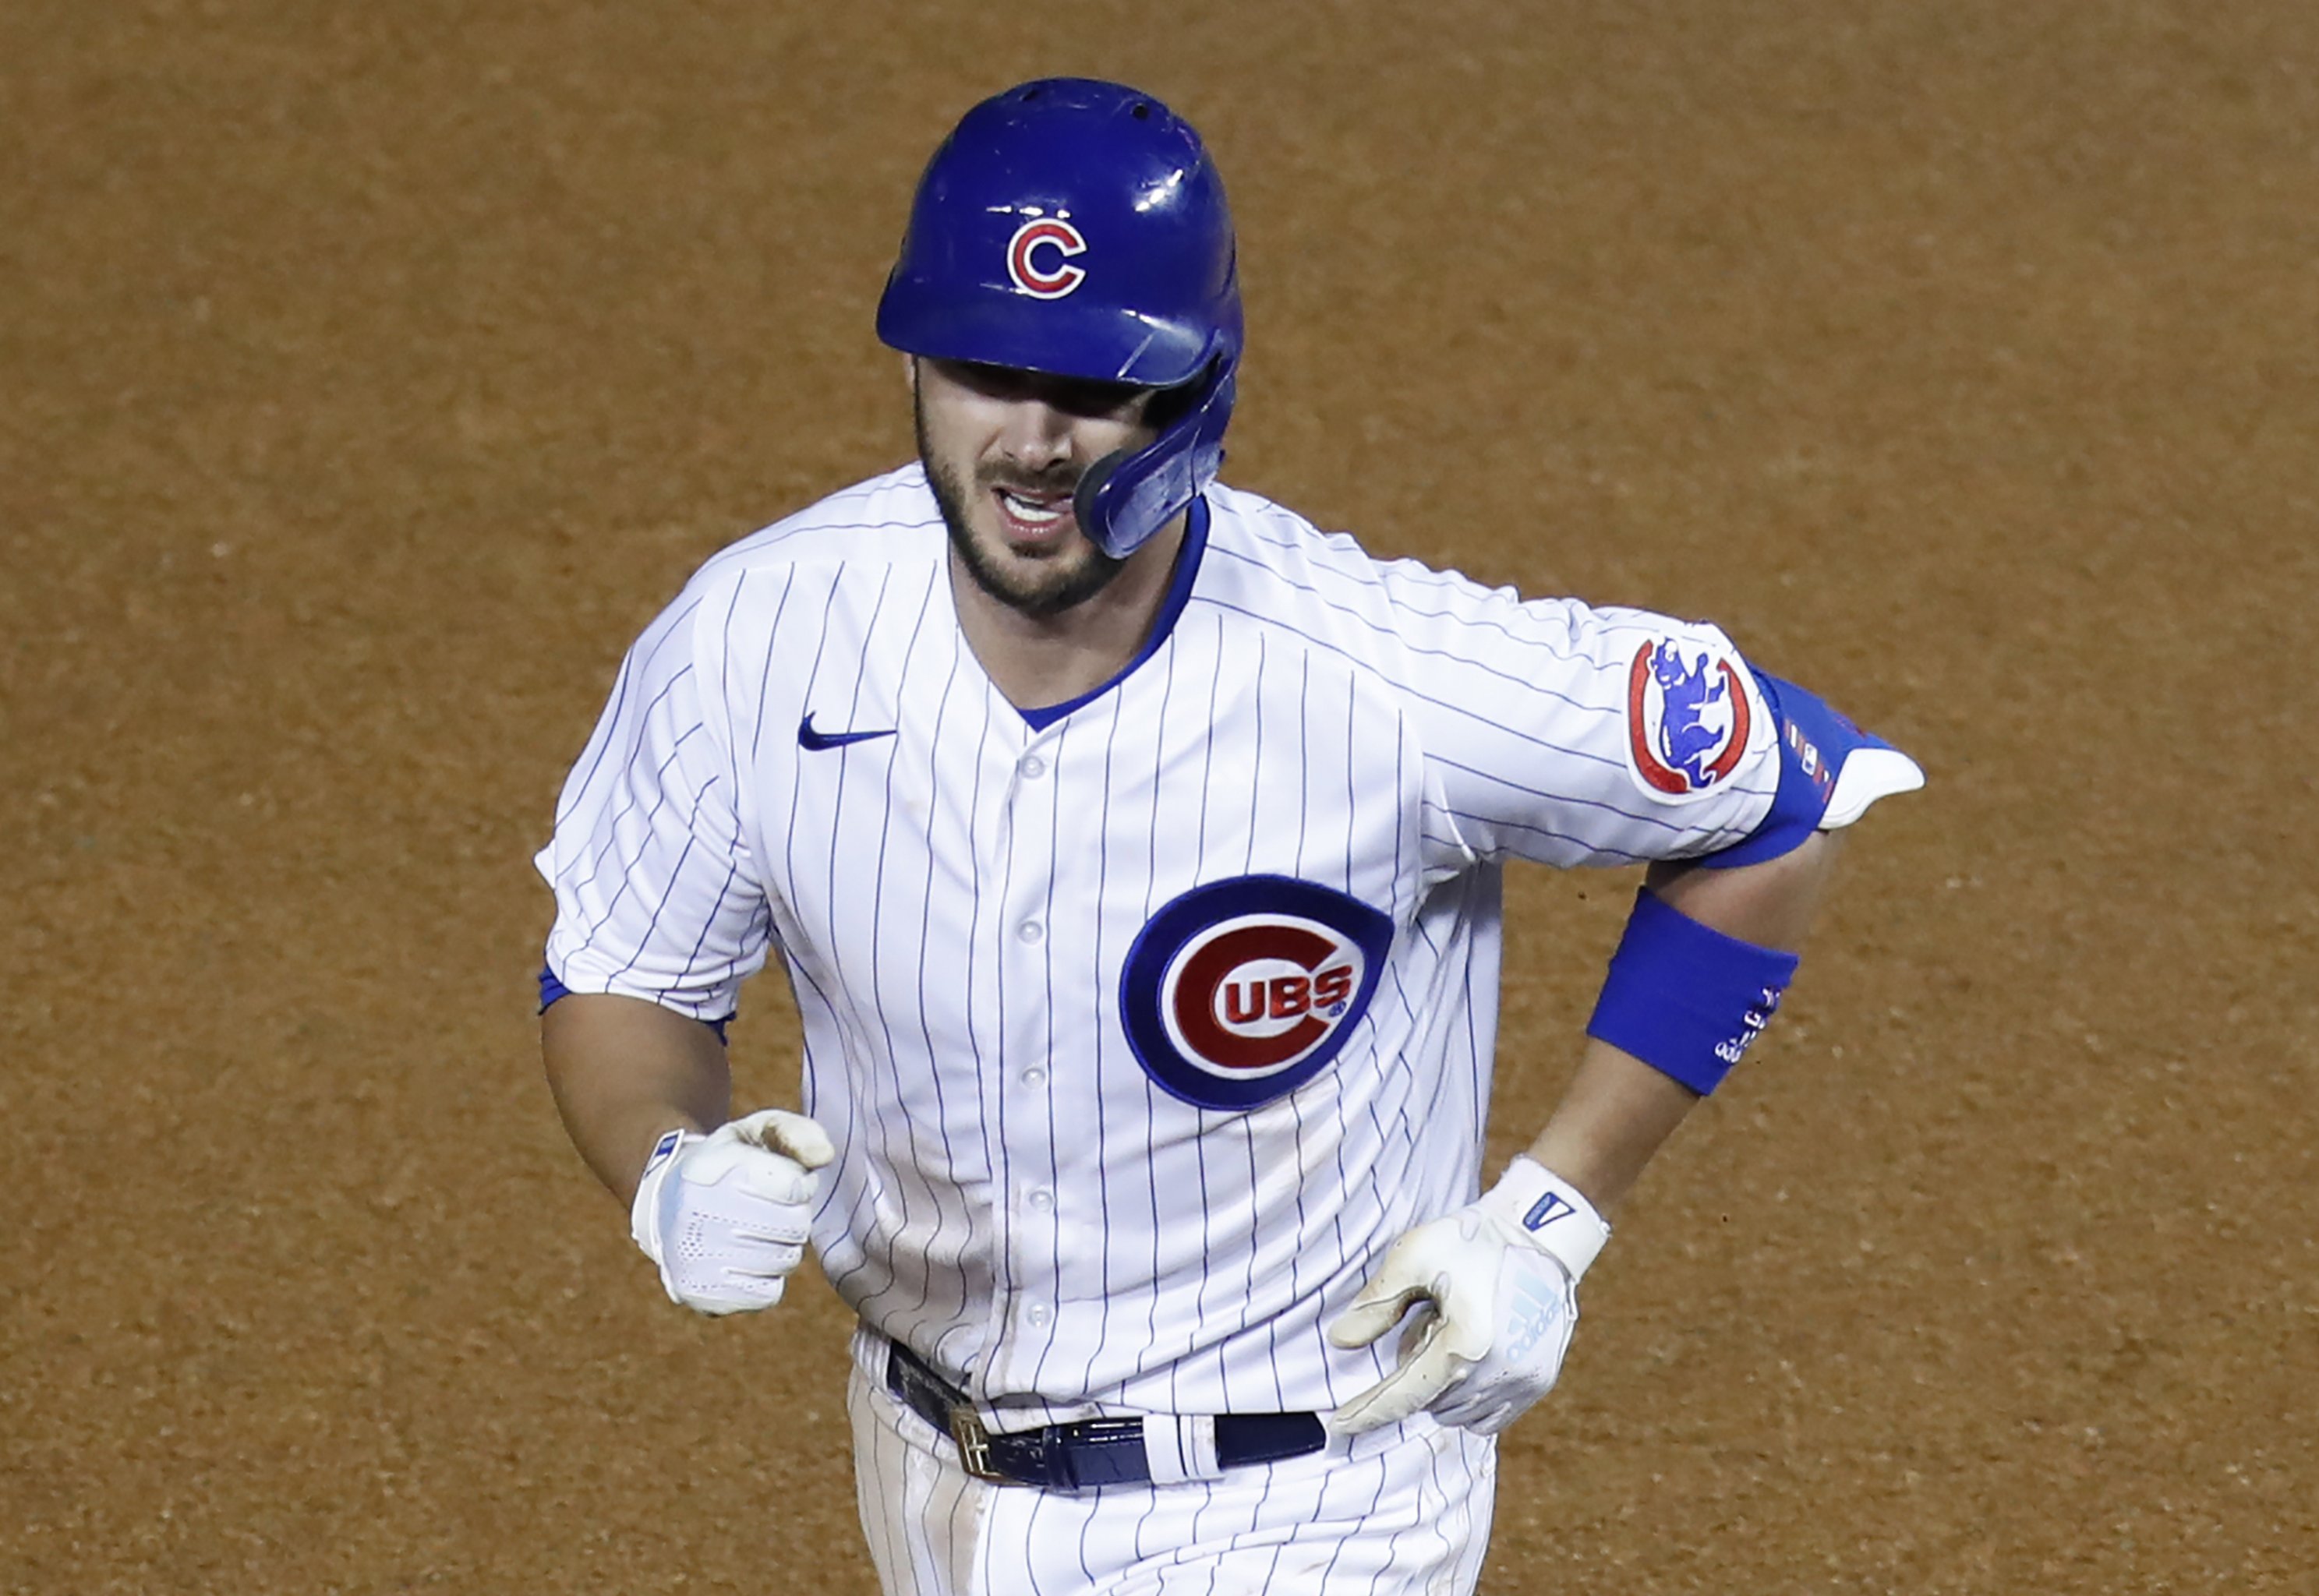 He was supposed to be the savior': How Kris Bryant made living up